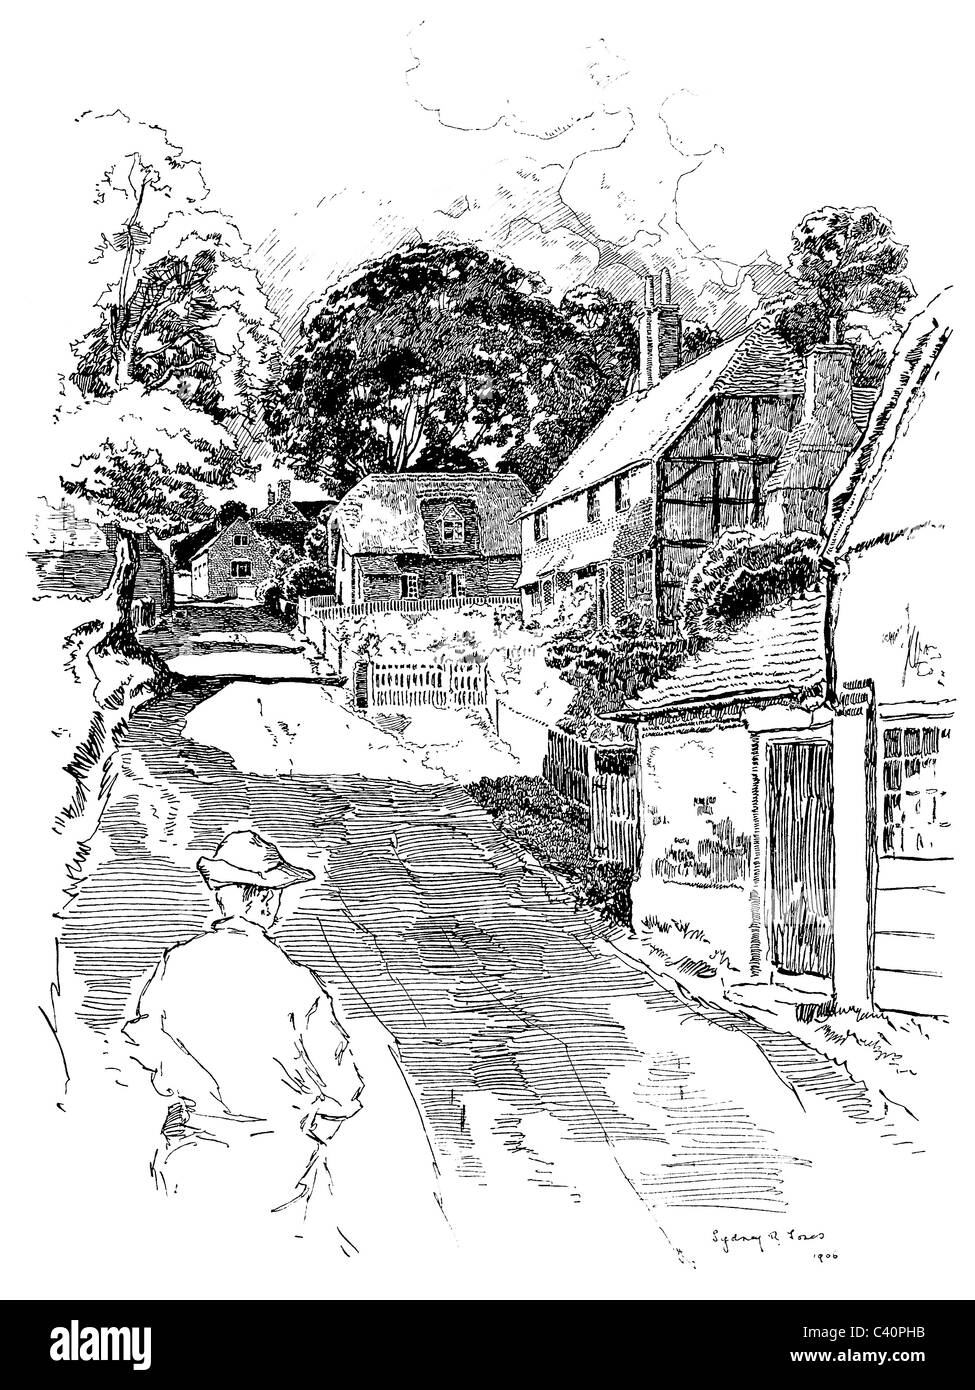 Upton Grey, Hampshire - pen and ink illustration from 'Old English Country Cottages' by Charles Holme, 1906. Stock Photo